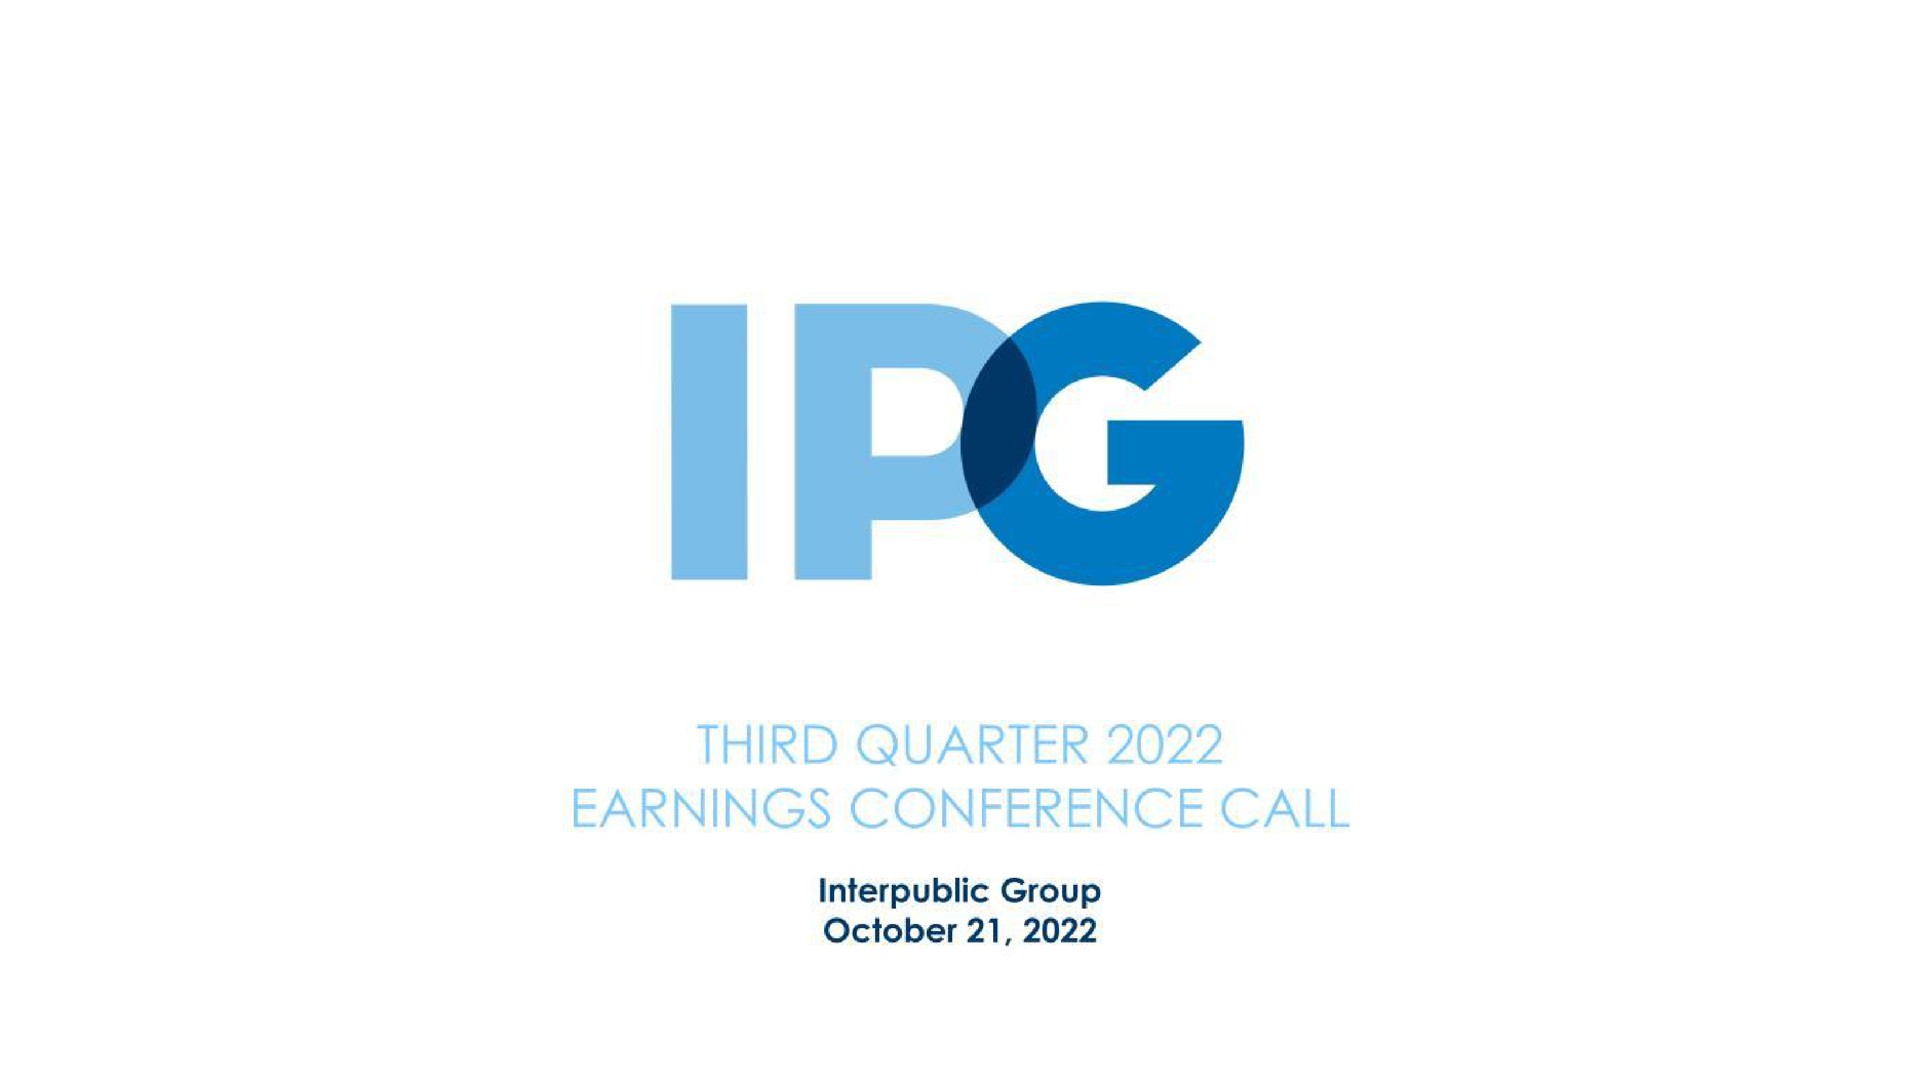 third quarter earnings conference call group | Interpublic Group of Companies